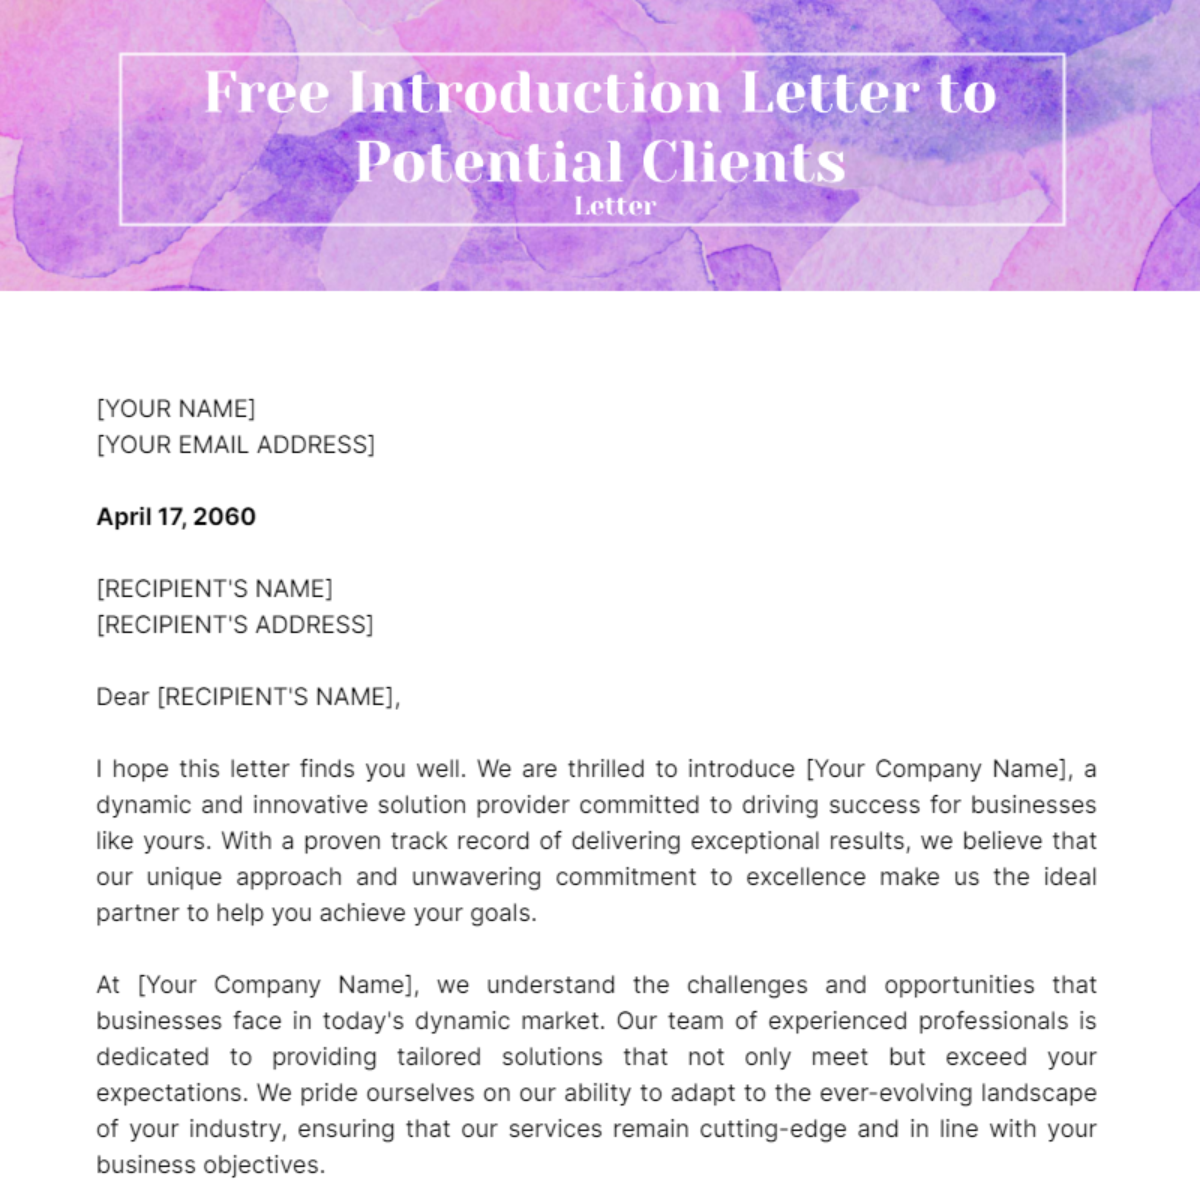 Introduction Letter to Potential Clients Template